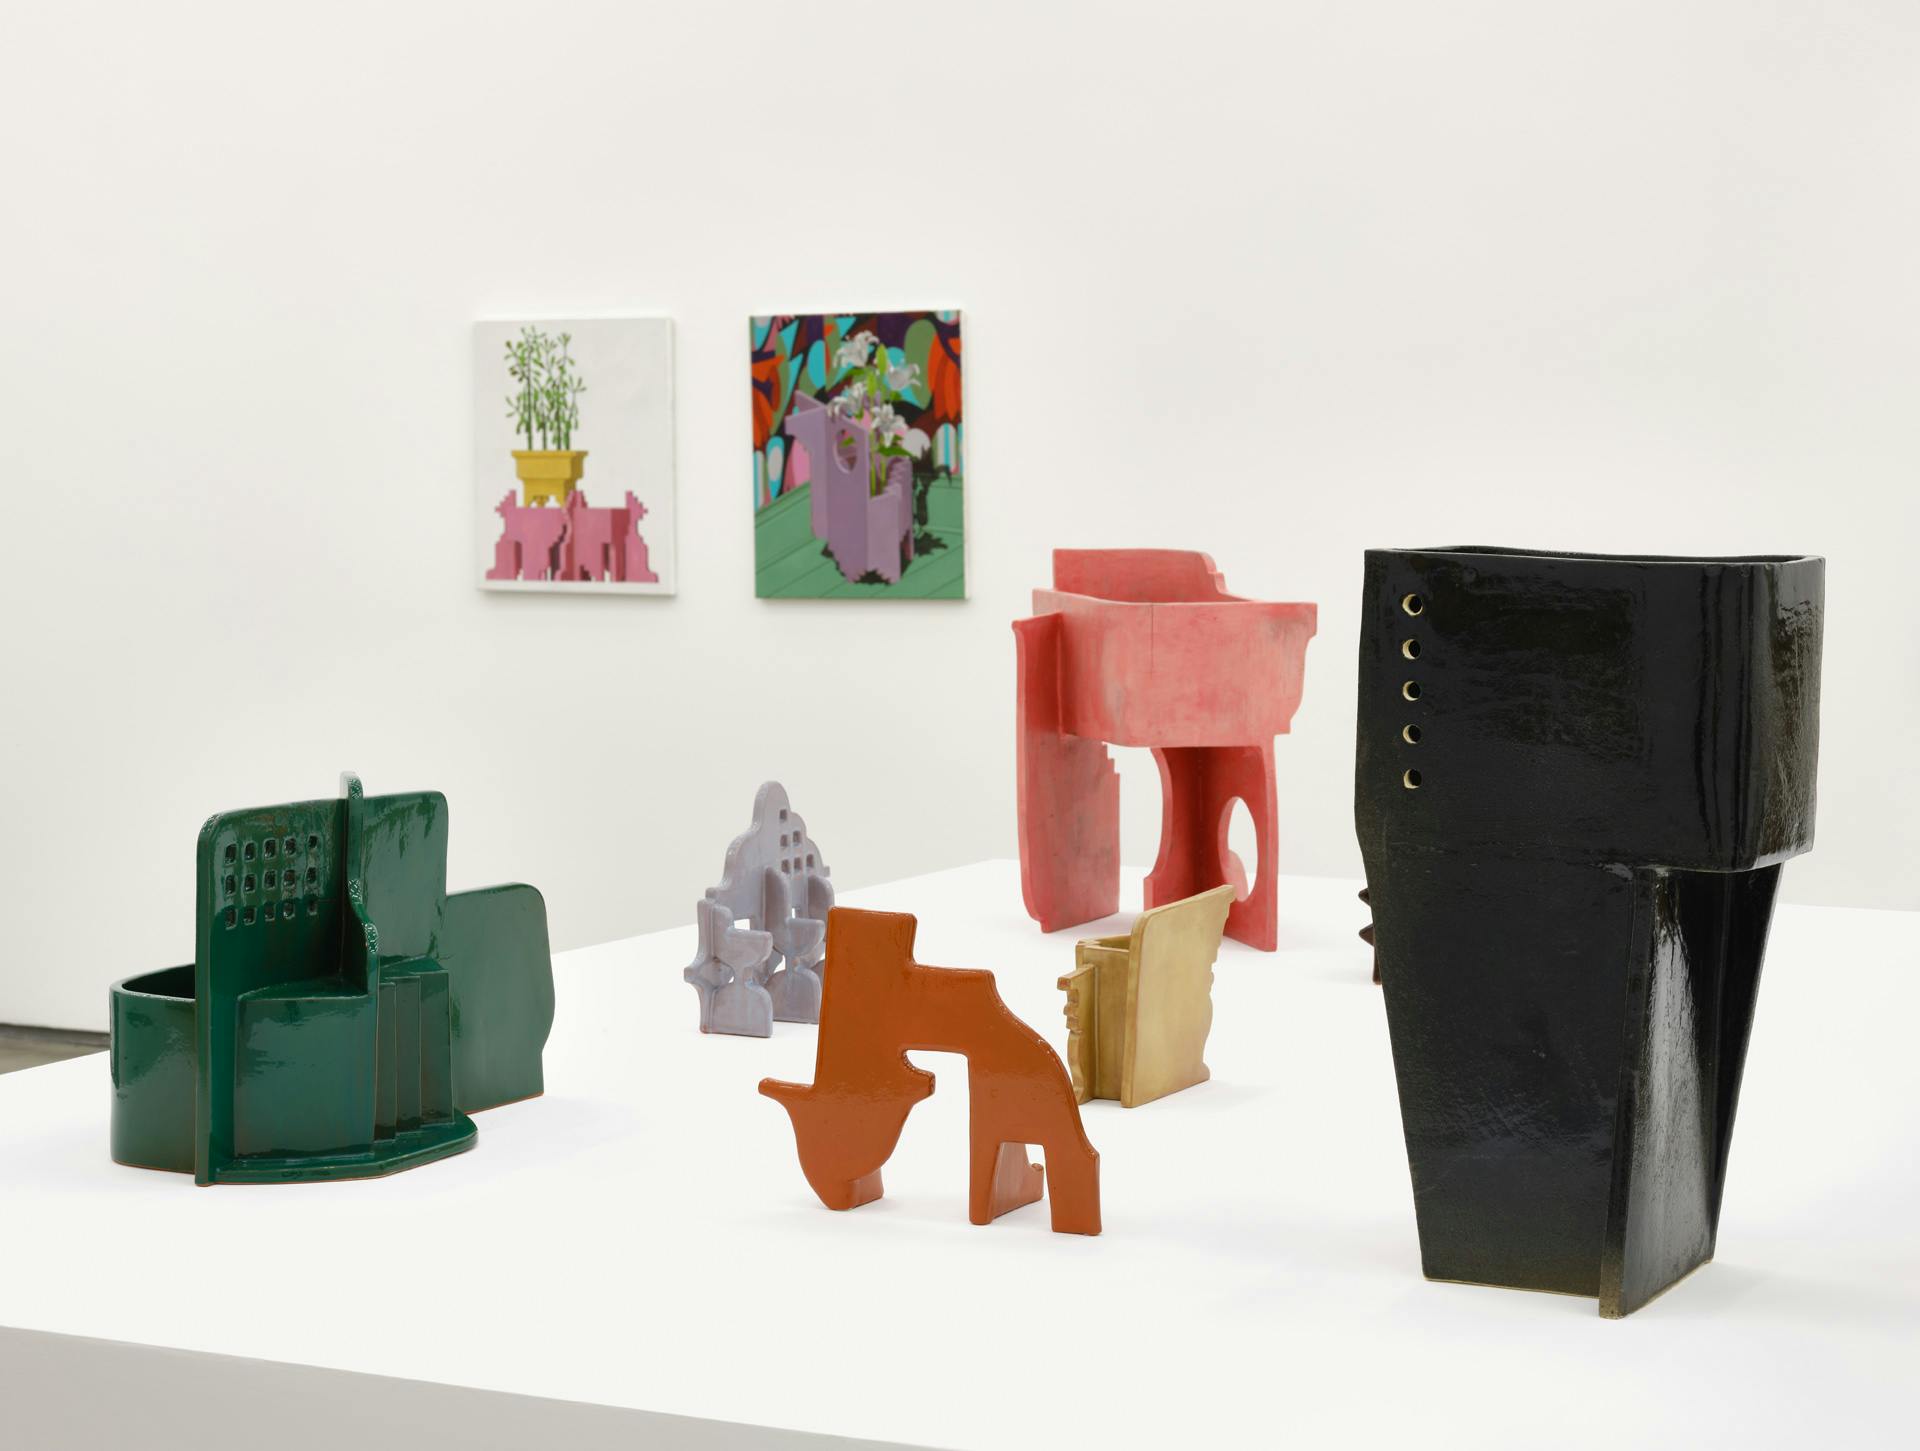 Installation image of Alex Morrison's sculptures and paintings in a gallery.